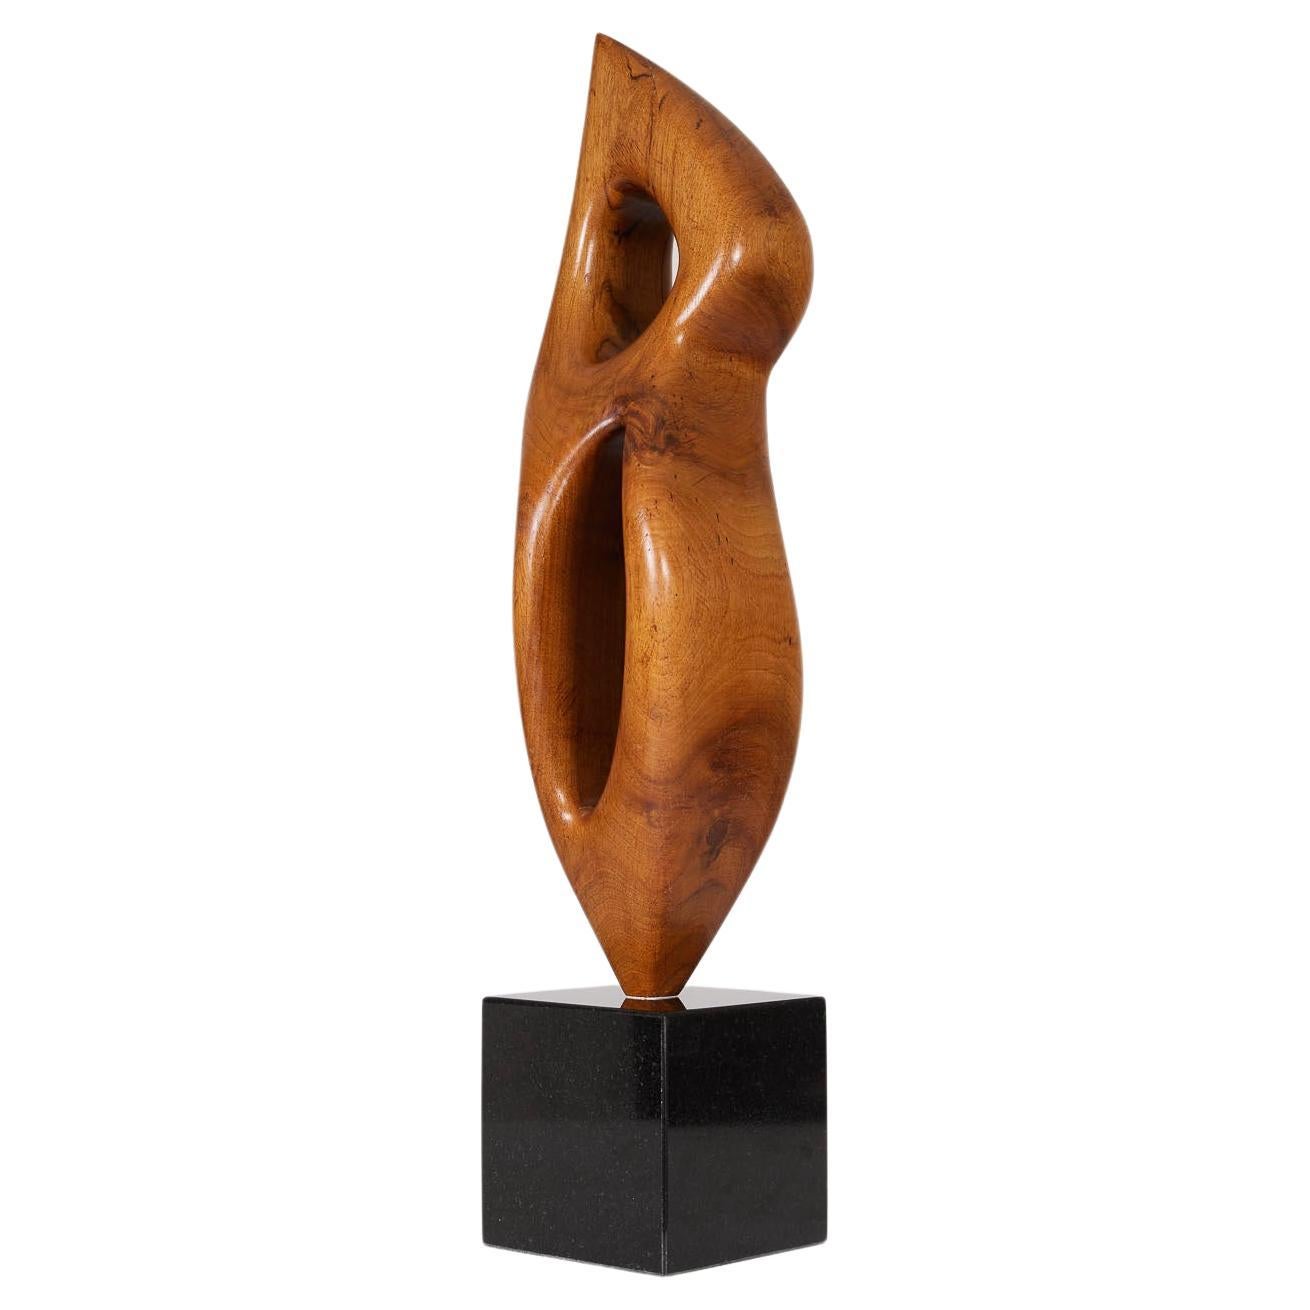  Abstract wood sculpture For Sale